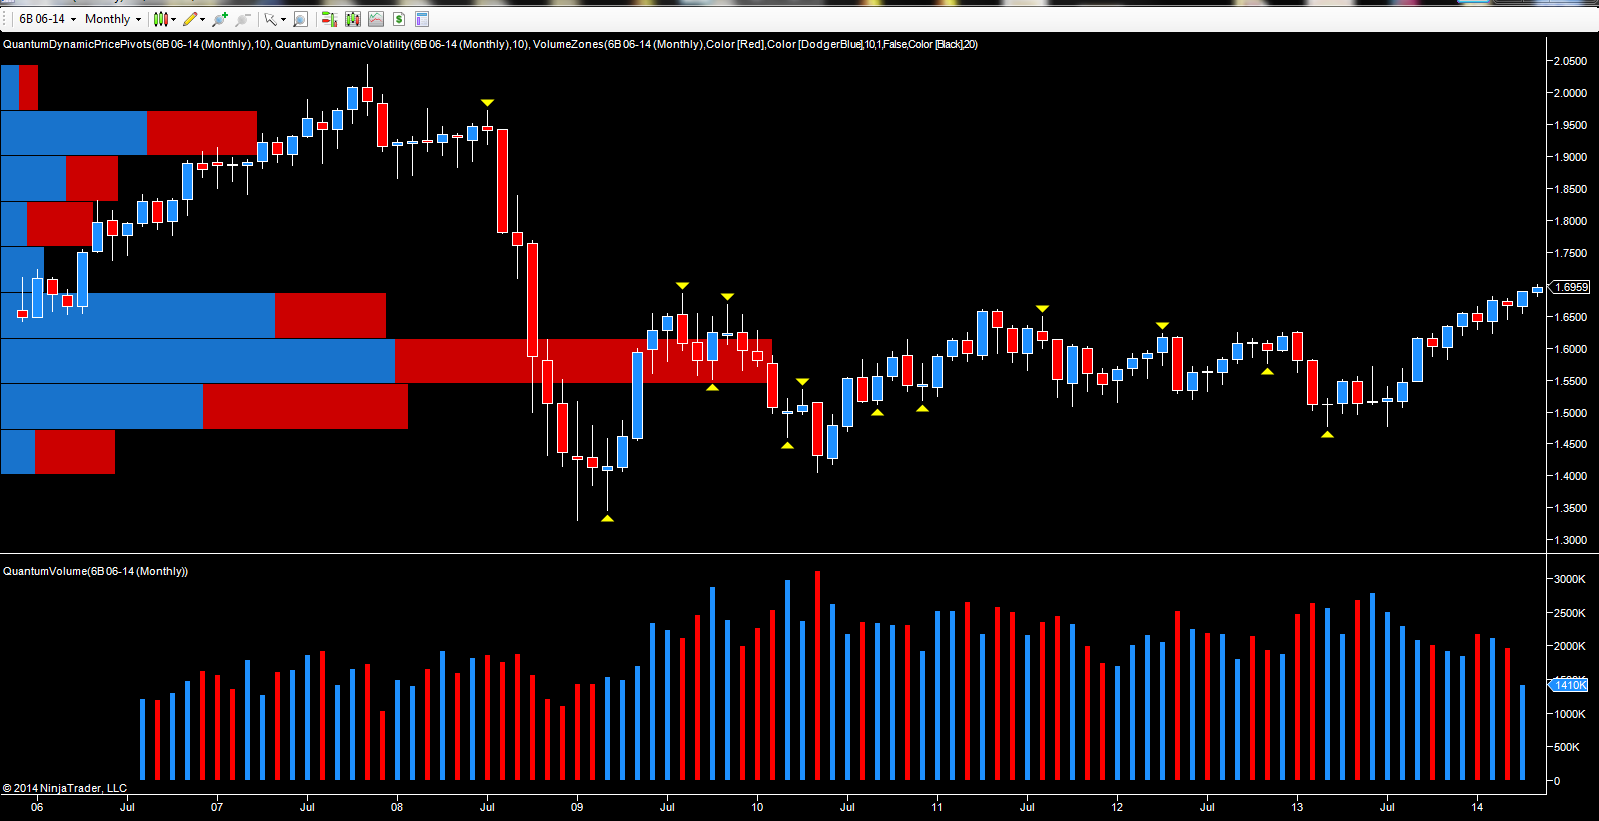 GBP/USD Monthly Chart